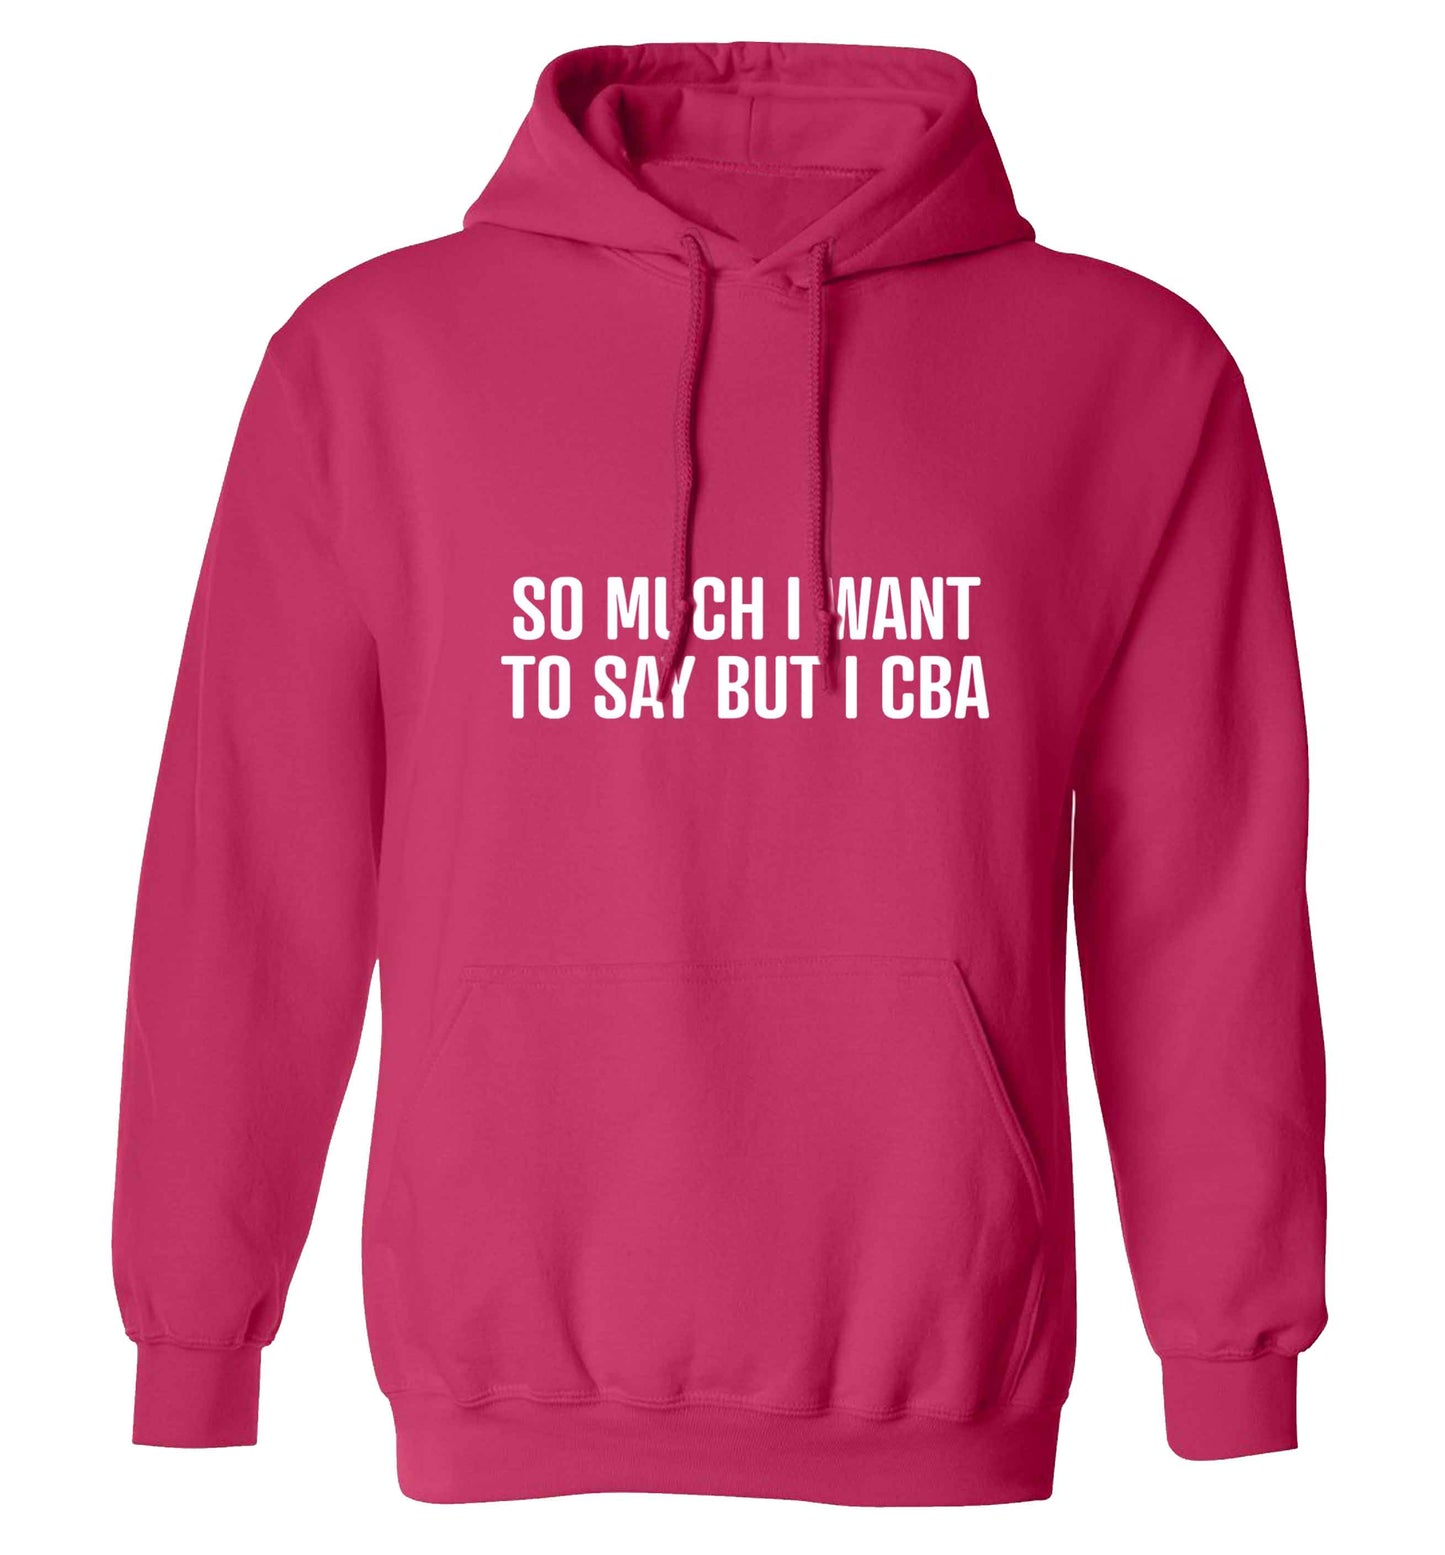 So much I want to say I cba  adults unisex pink hoodie 2XL